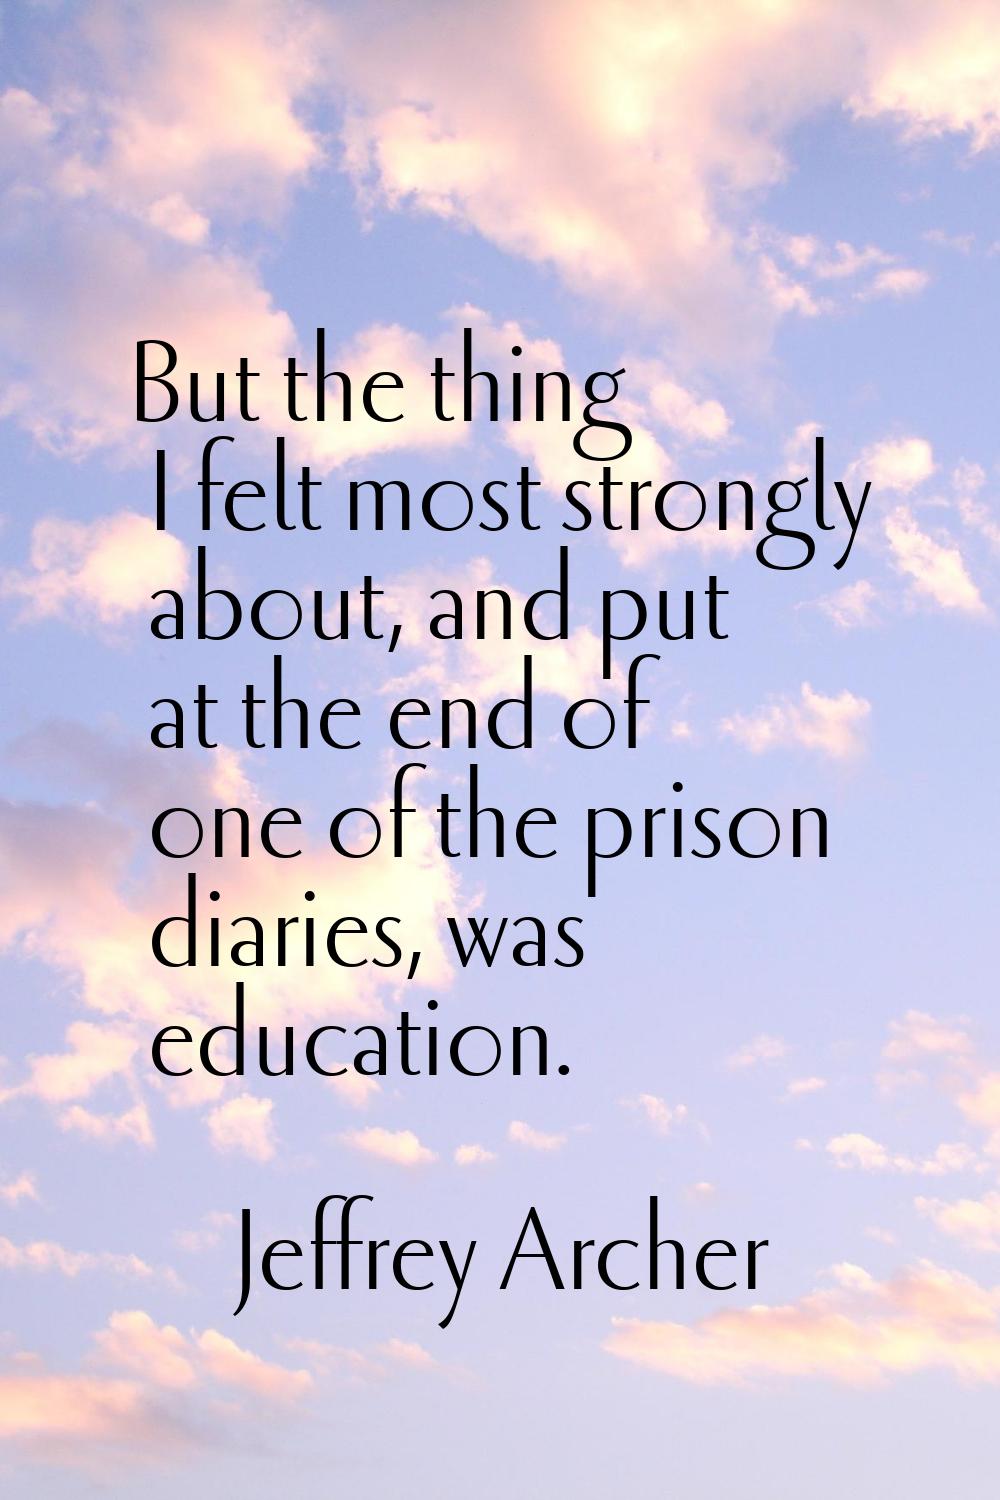 But the thing I felt most strongly about, and put at the end of one of the prison diaries, was educ